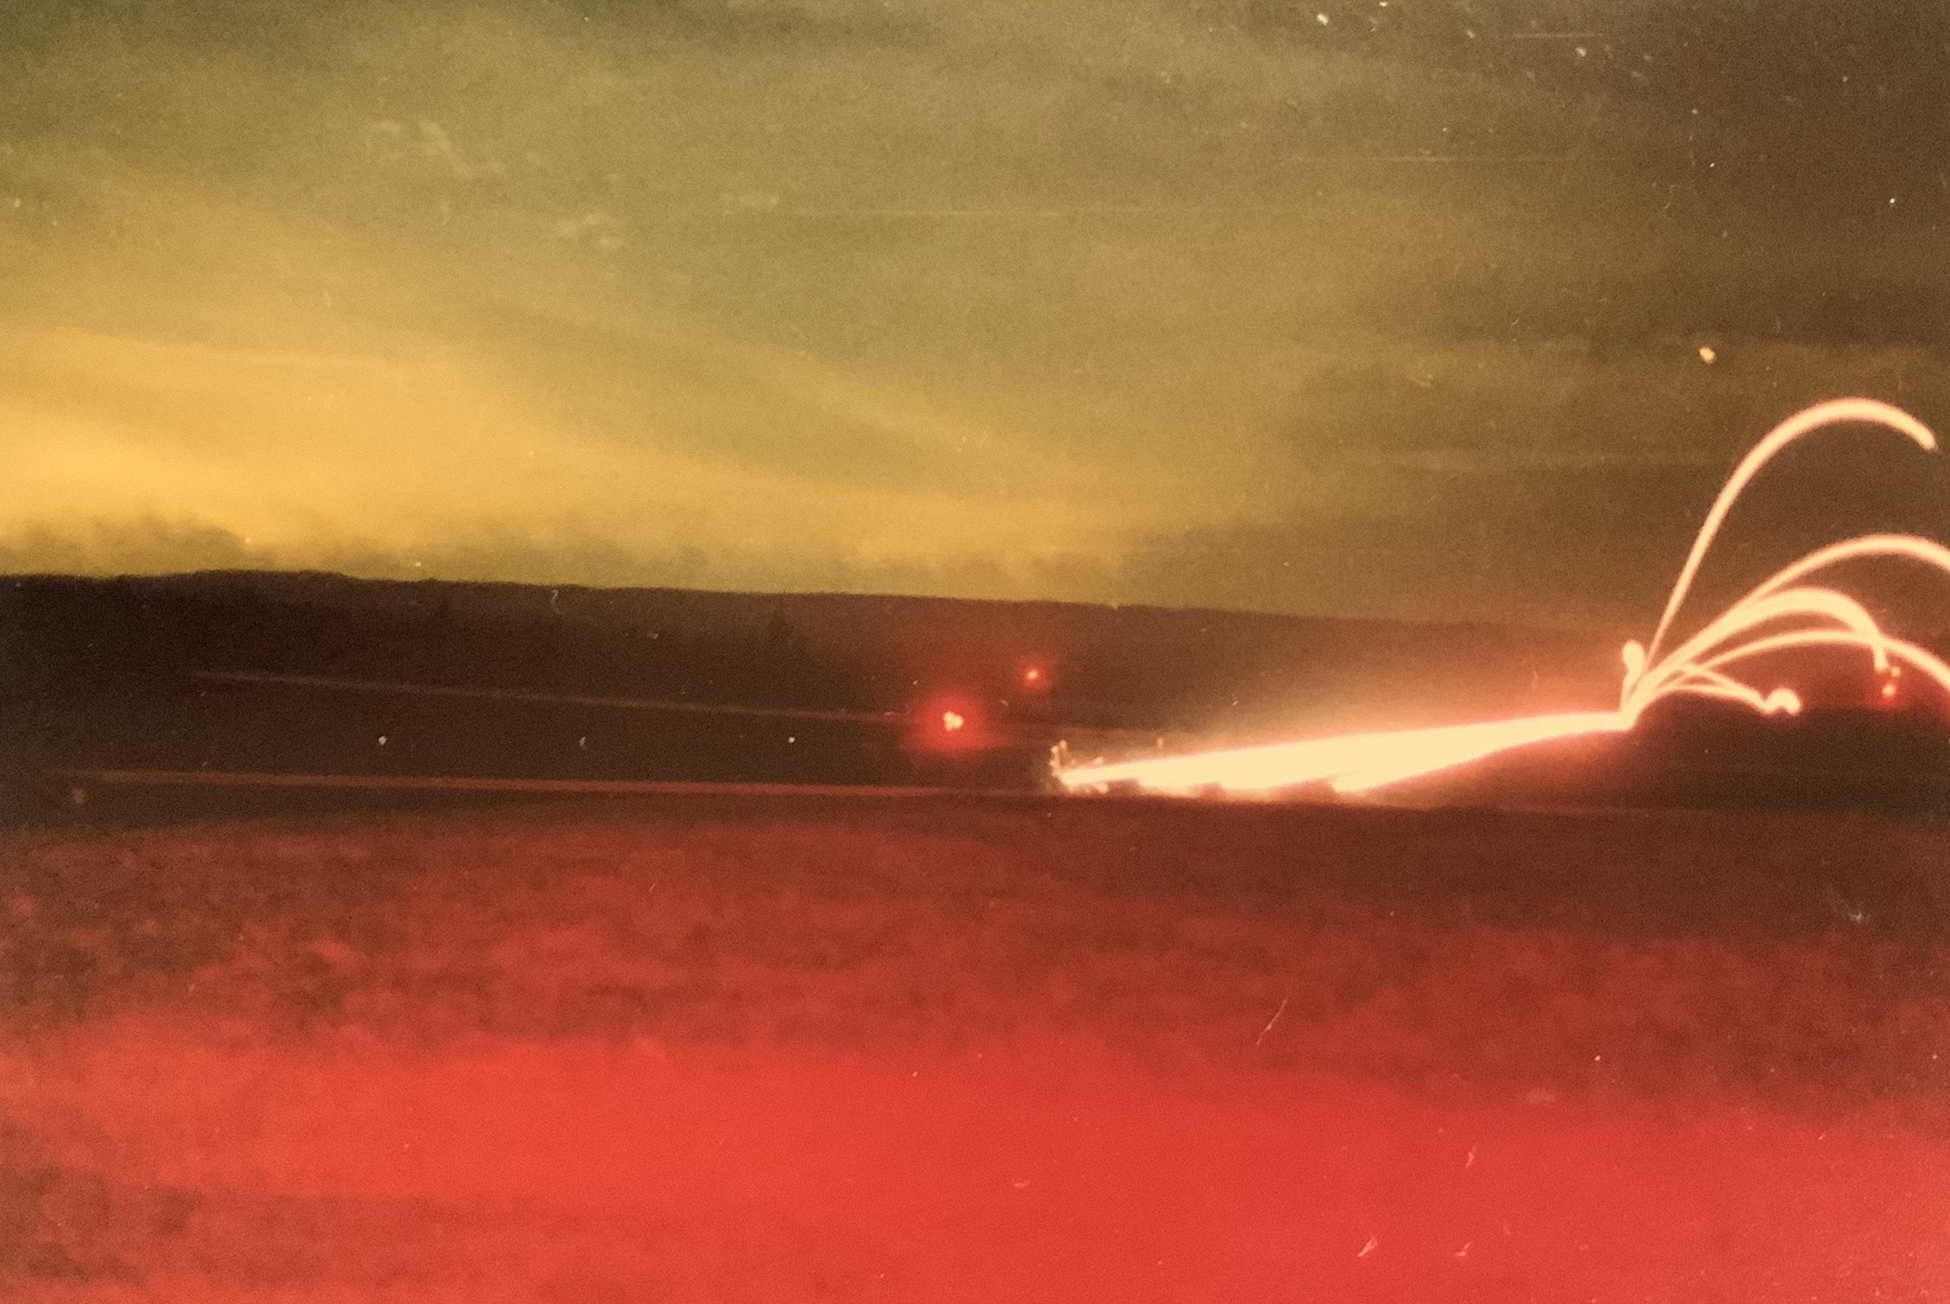 This is one of my photos from gunnery in May 1988. This is an M3 Bradley Fighting Vehicle firing on the move on range 397 at Granenwoehr. You can see the large lights off in the distance, which were range fan markers. These giant chevrons pointed in toward the center of the range. They were heated to show up on thermal night sights and gave crews a reference to stay oriented and keep their weapons pointing at the correct target area. The red glow in the bottom of the picture was from the lights inside the range control tower, which I was standing in front of.